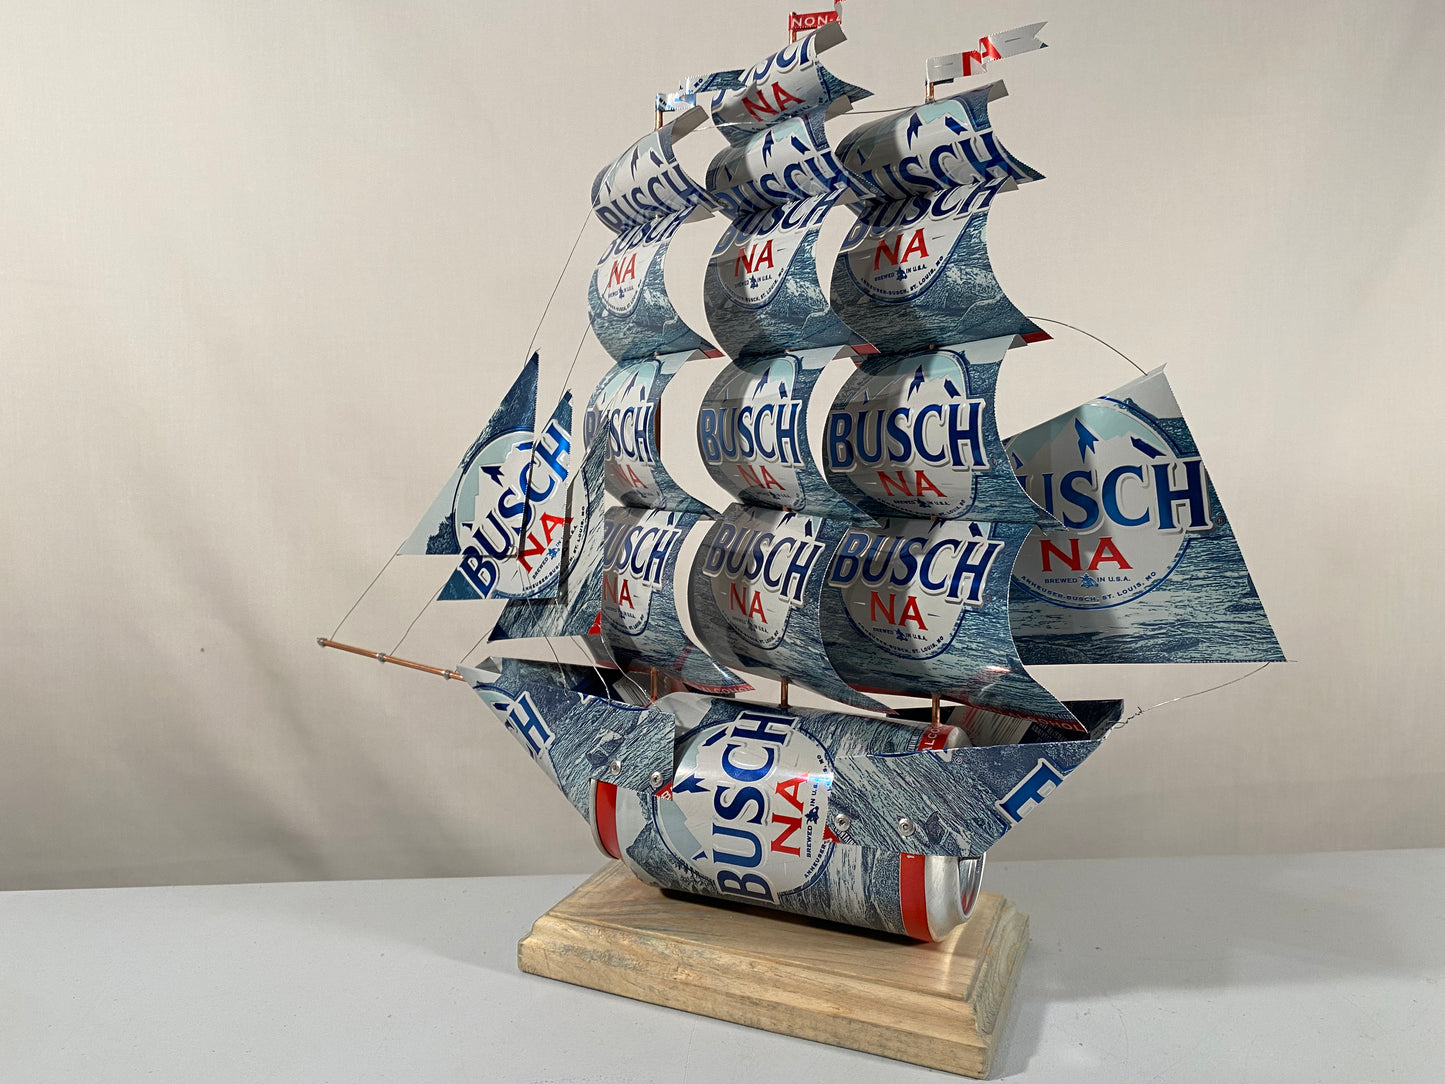 Anheuser Busch NA Beer Can Ship